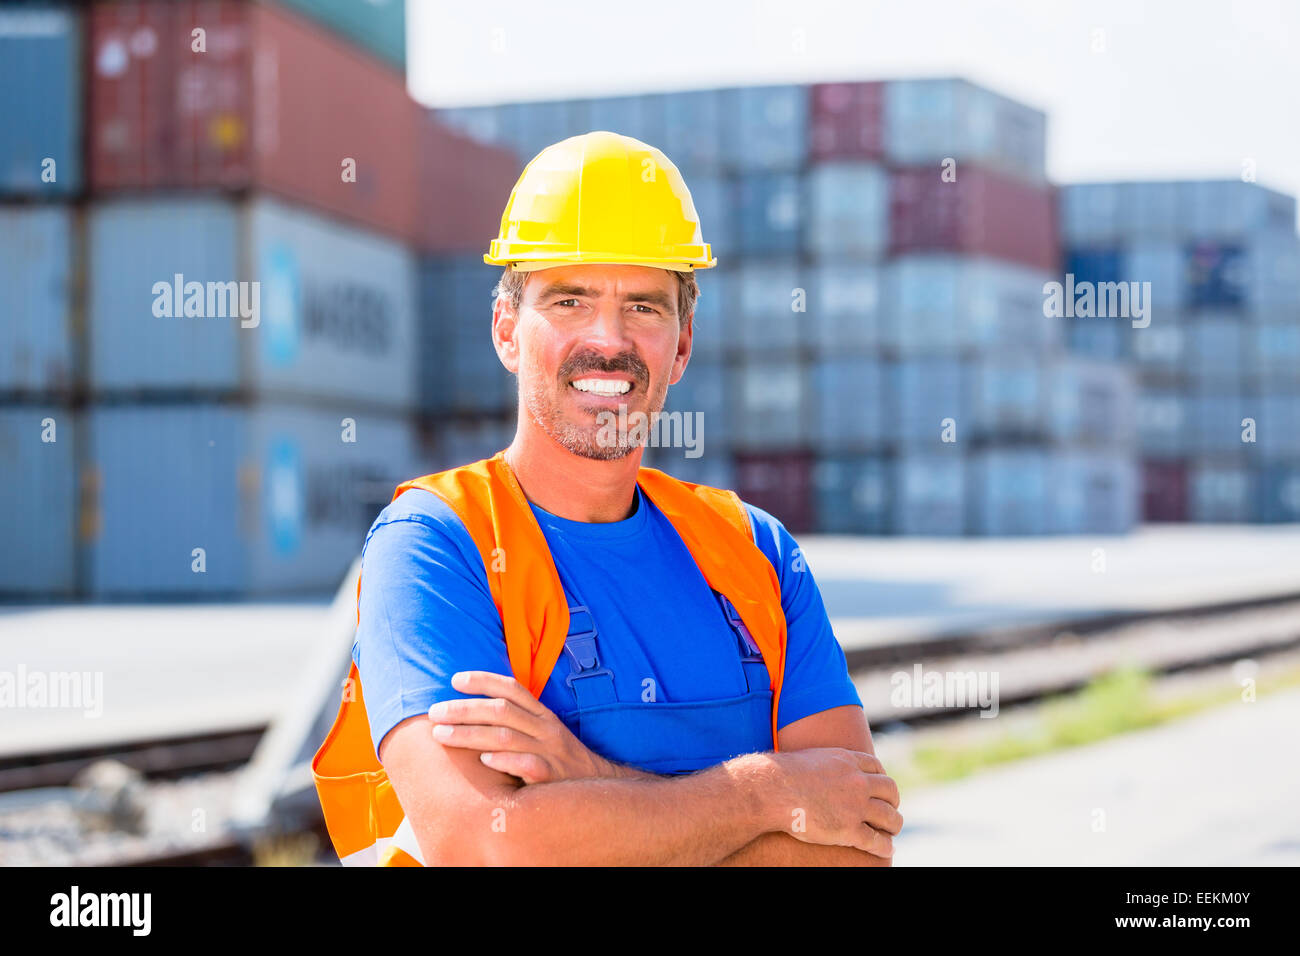 Worker standing in front of row of containers on port or yard of shipment company Stock Photo